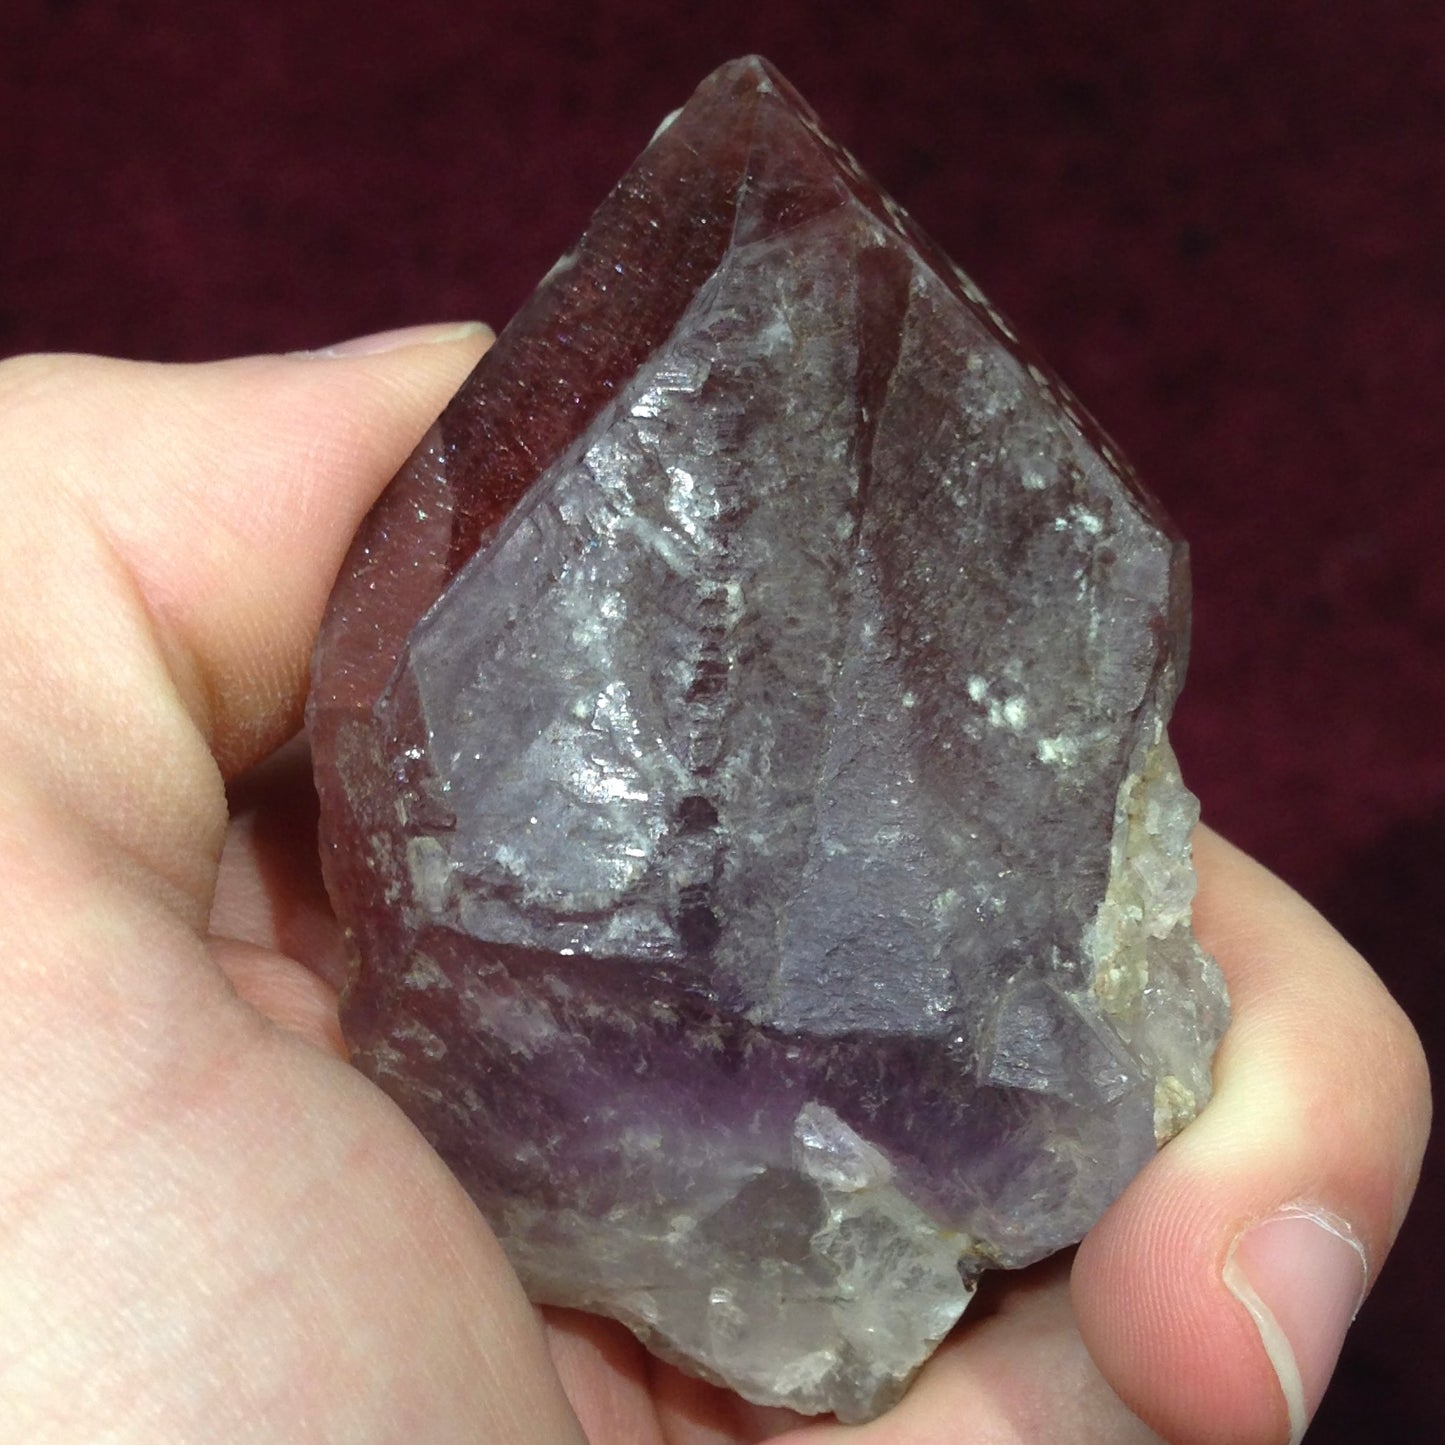 A red amethyst crystal from Mexico colored with the inclusions lepidocrocite and hematite inclusions.